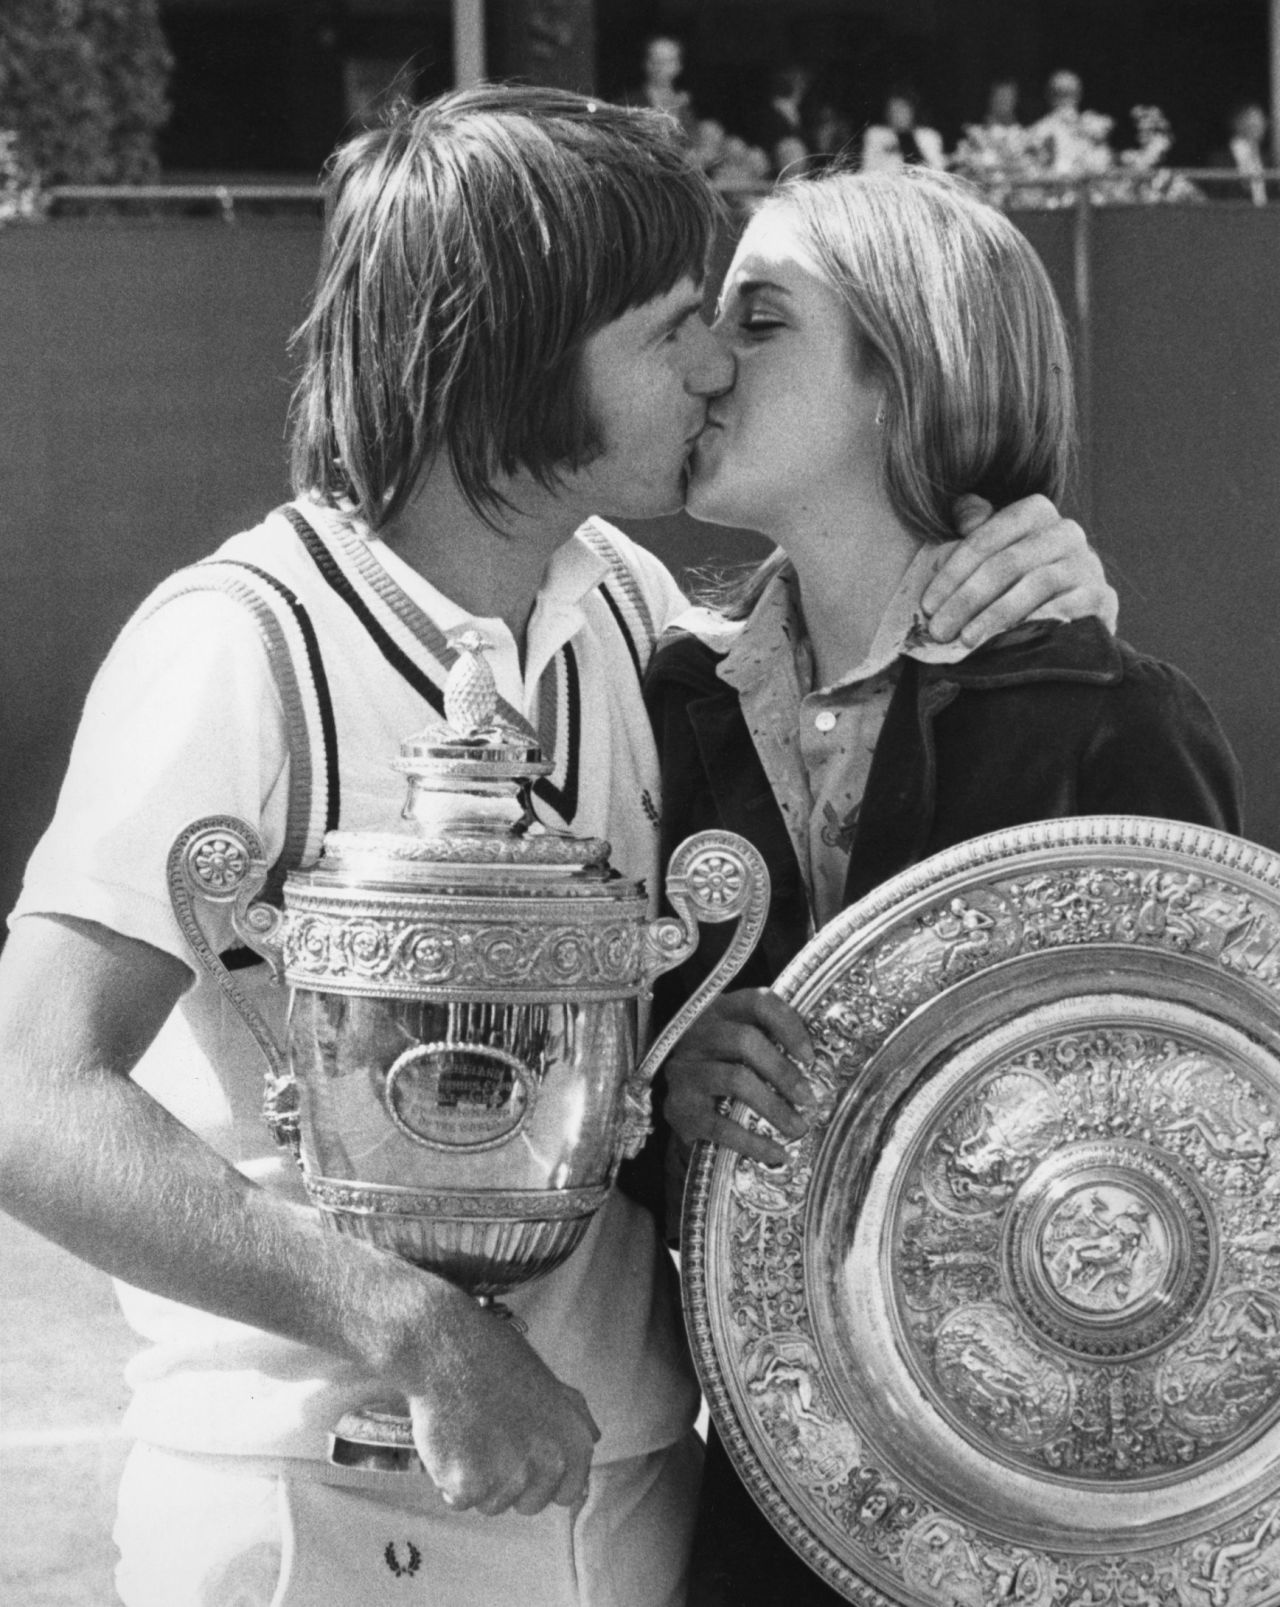 American lovebirds Jimmy Connors and Chris Evert won both singles titles at Wimbledon in 1974 and were engaged, but by the time the grass-court grand slam came around in 1975 the wedding was off. Decades after splitting from the eight-time grand slam champion, Evert swapped the tennis court for the golf course...